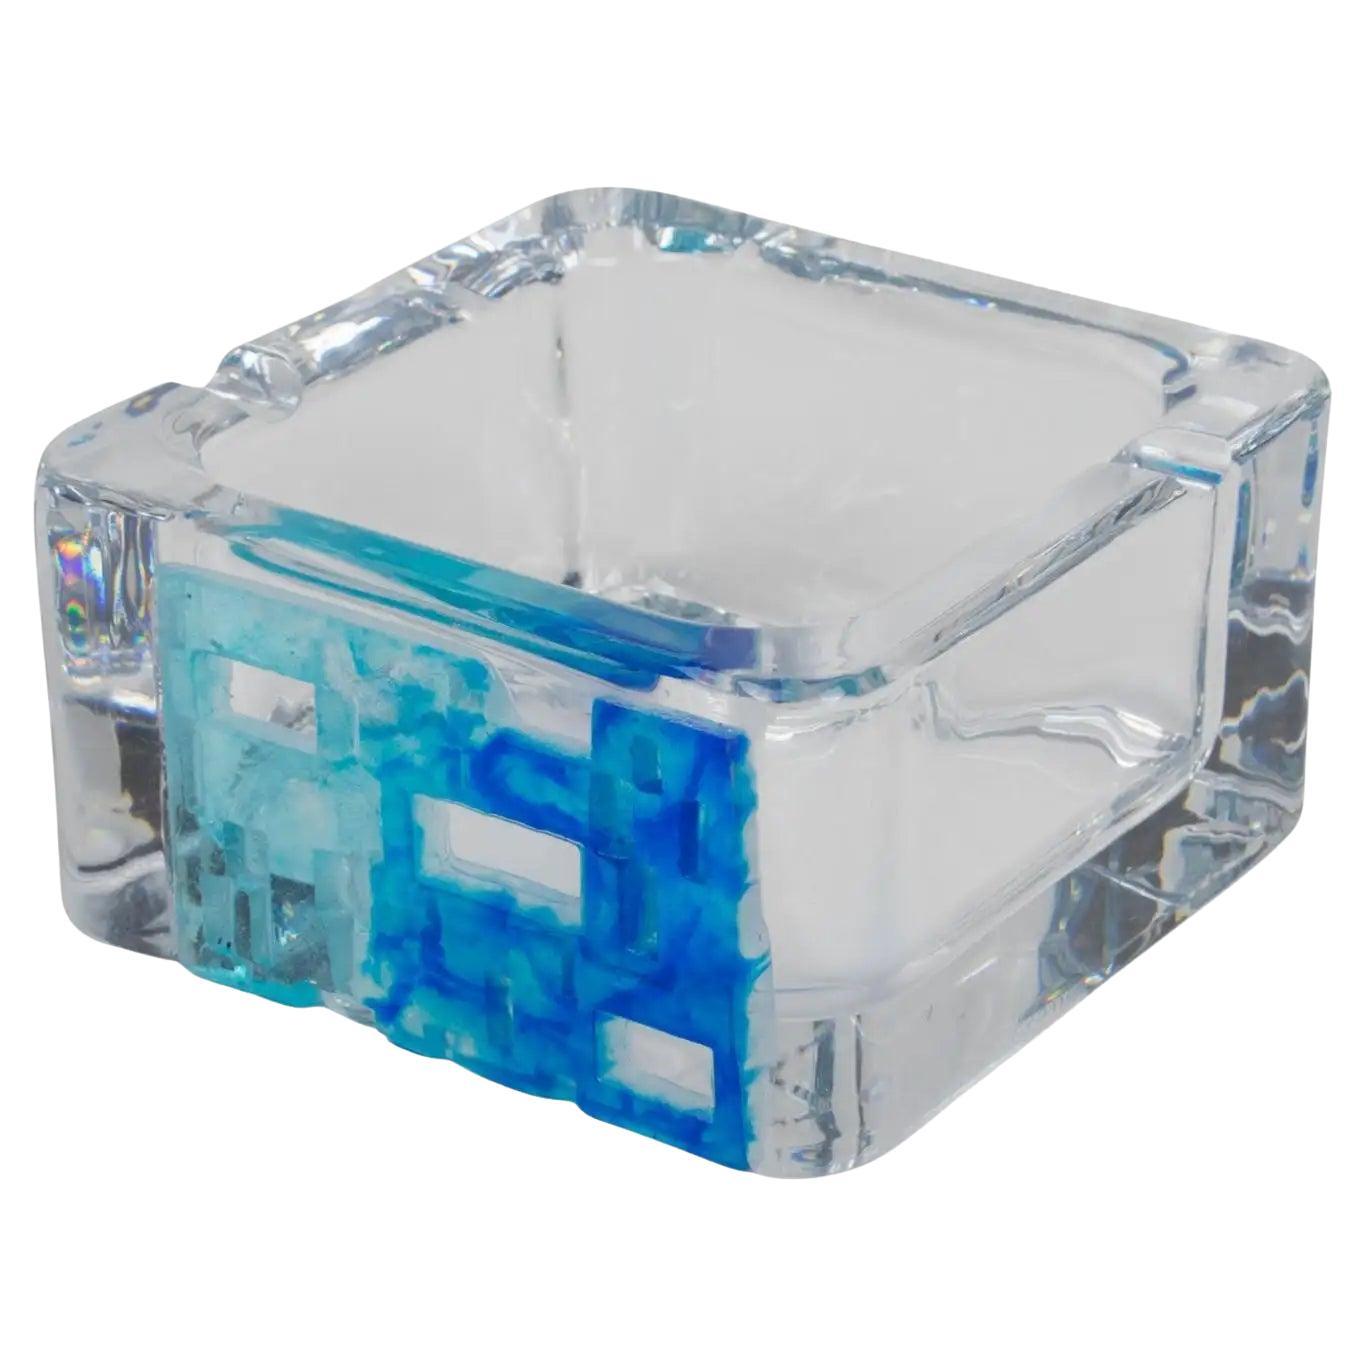 Daum Crystal and Blue Pate de Verre Ashtray Desk Tidy Bowl Catchall For Sale